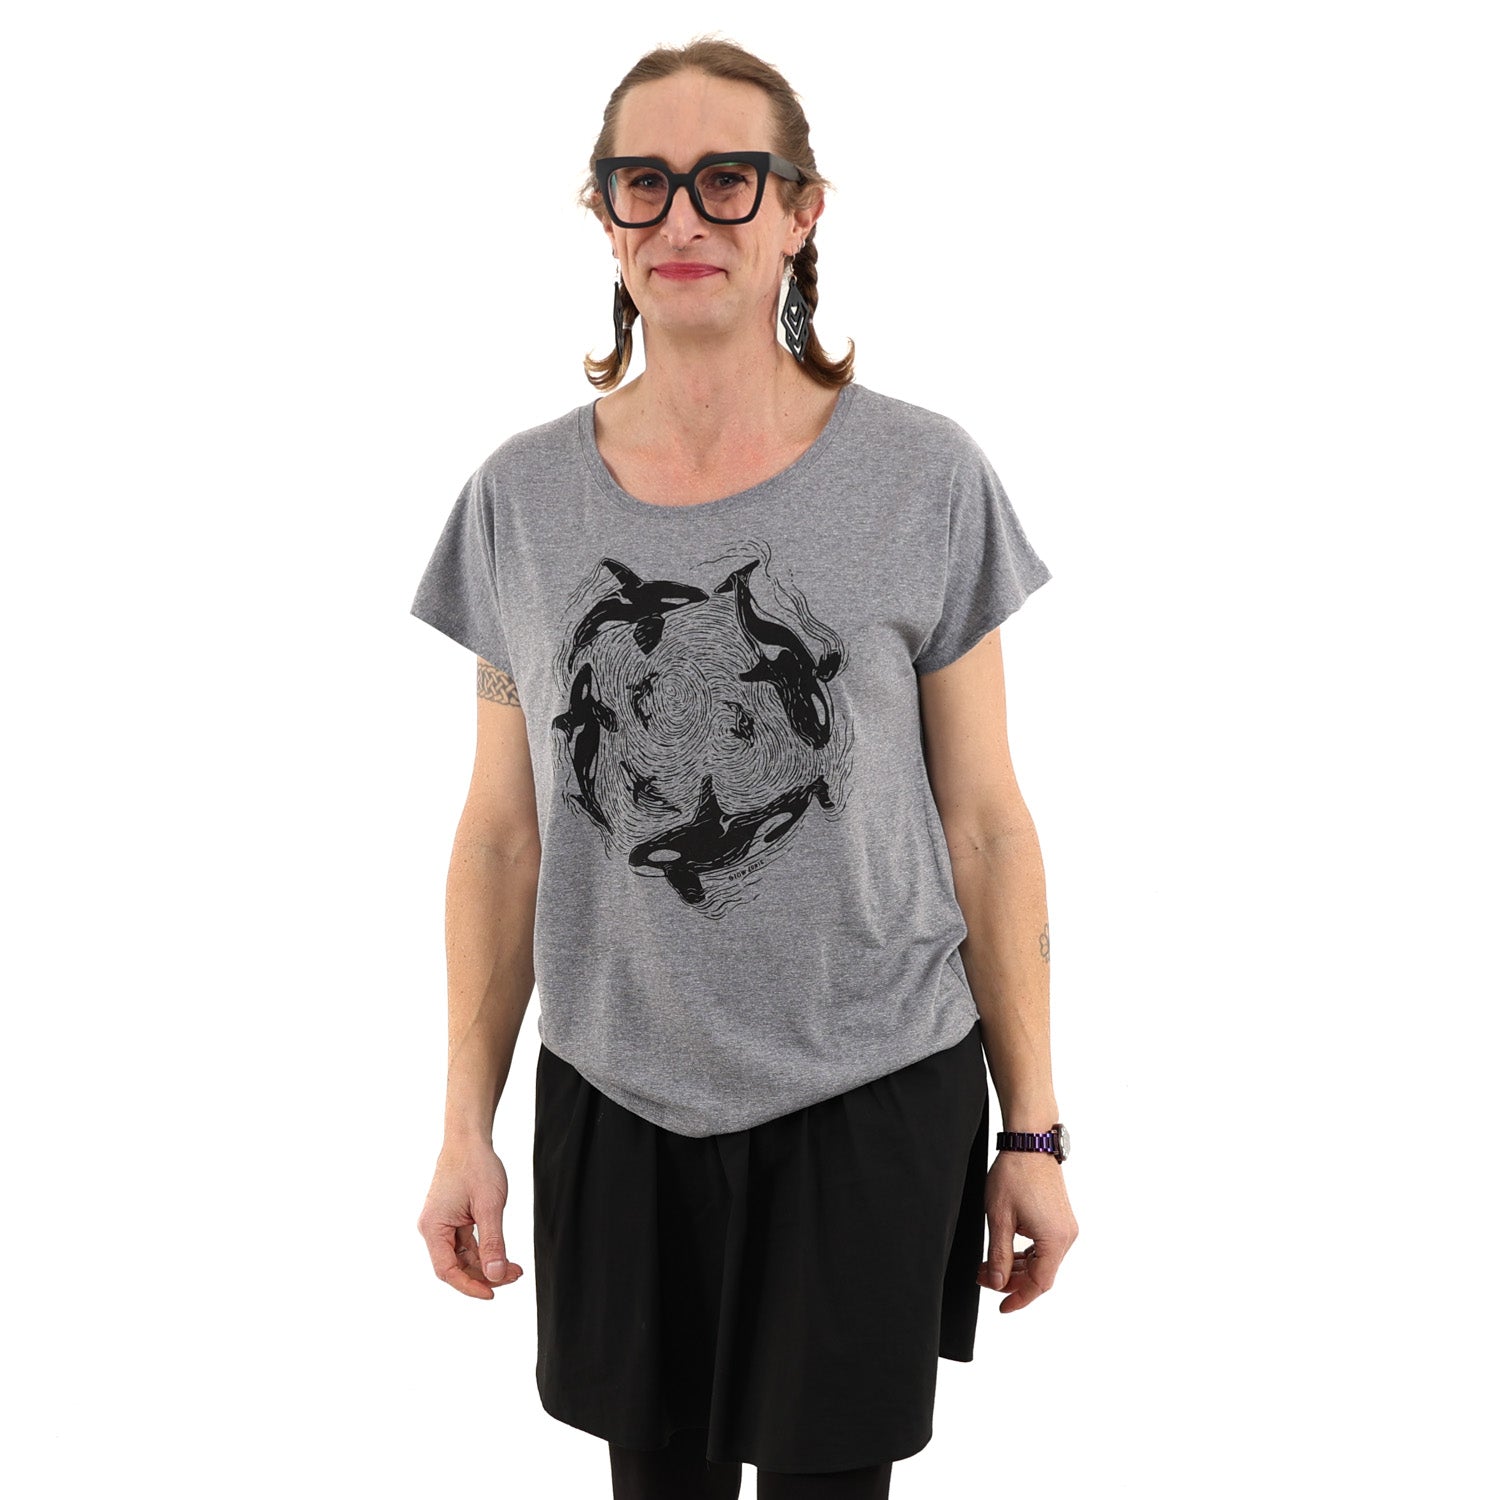  Woman wearing relax fit grey t shirt with orca whales printed in black ink